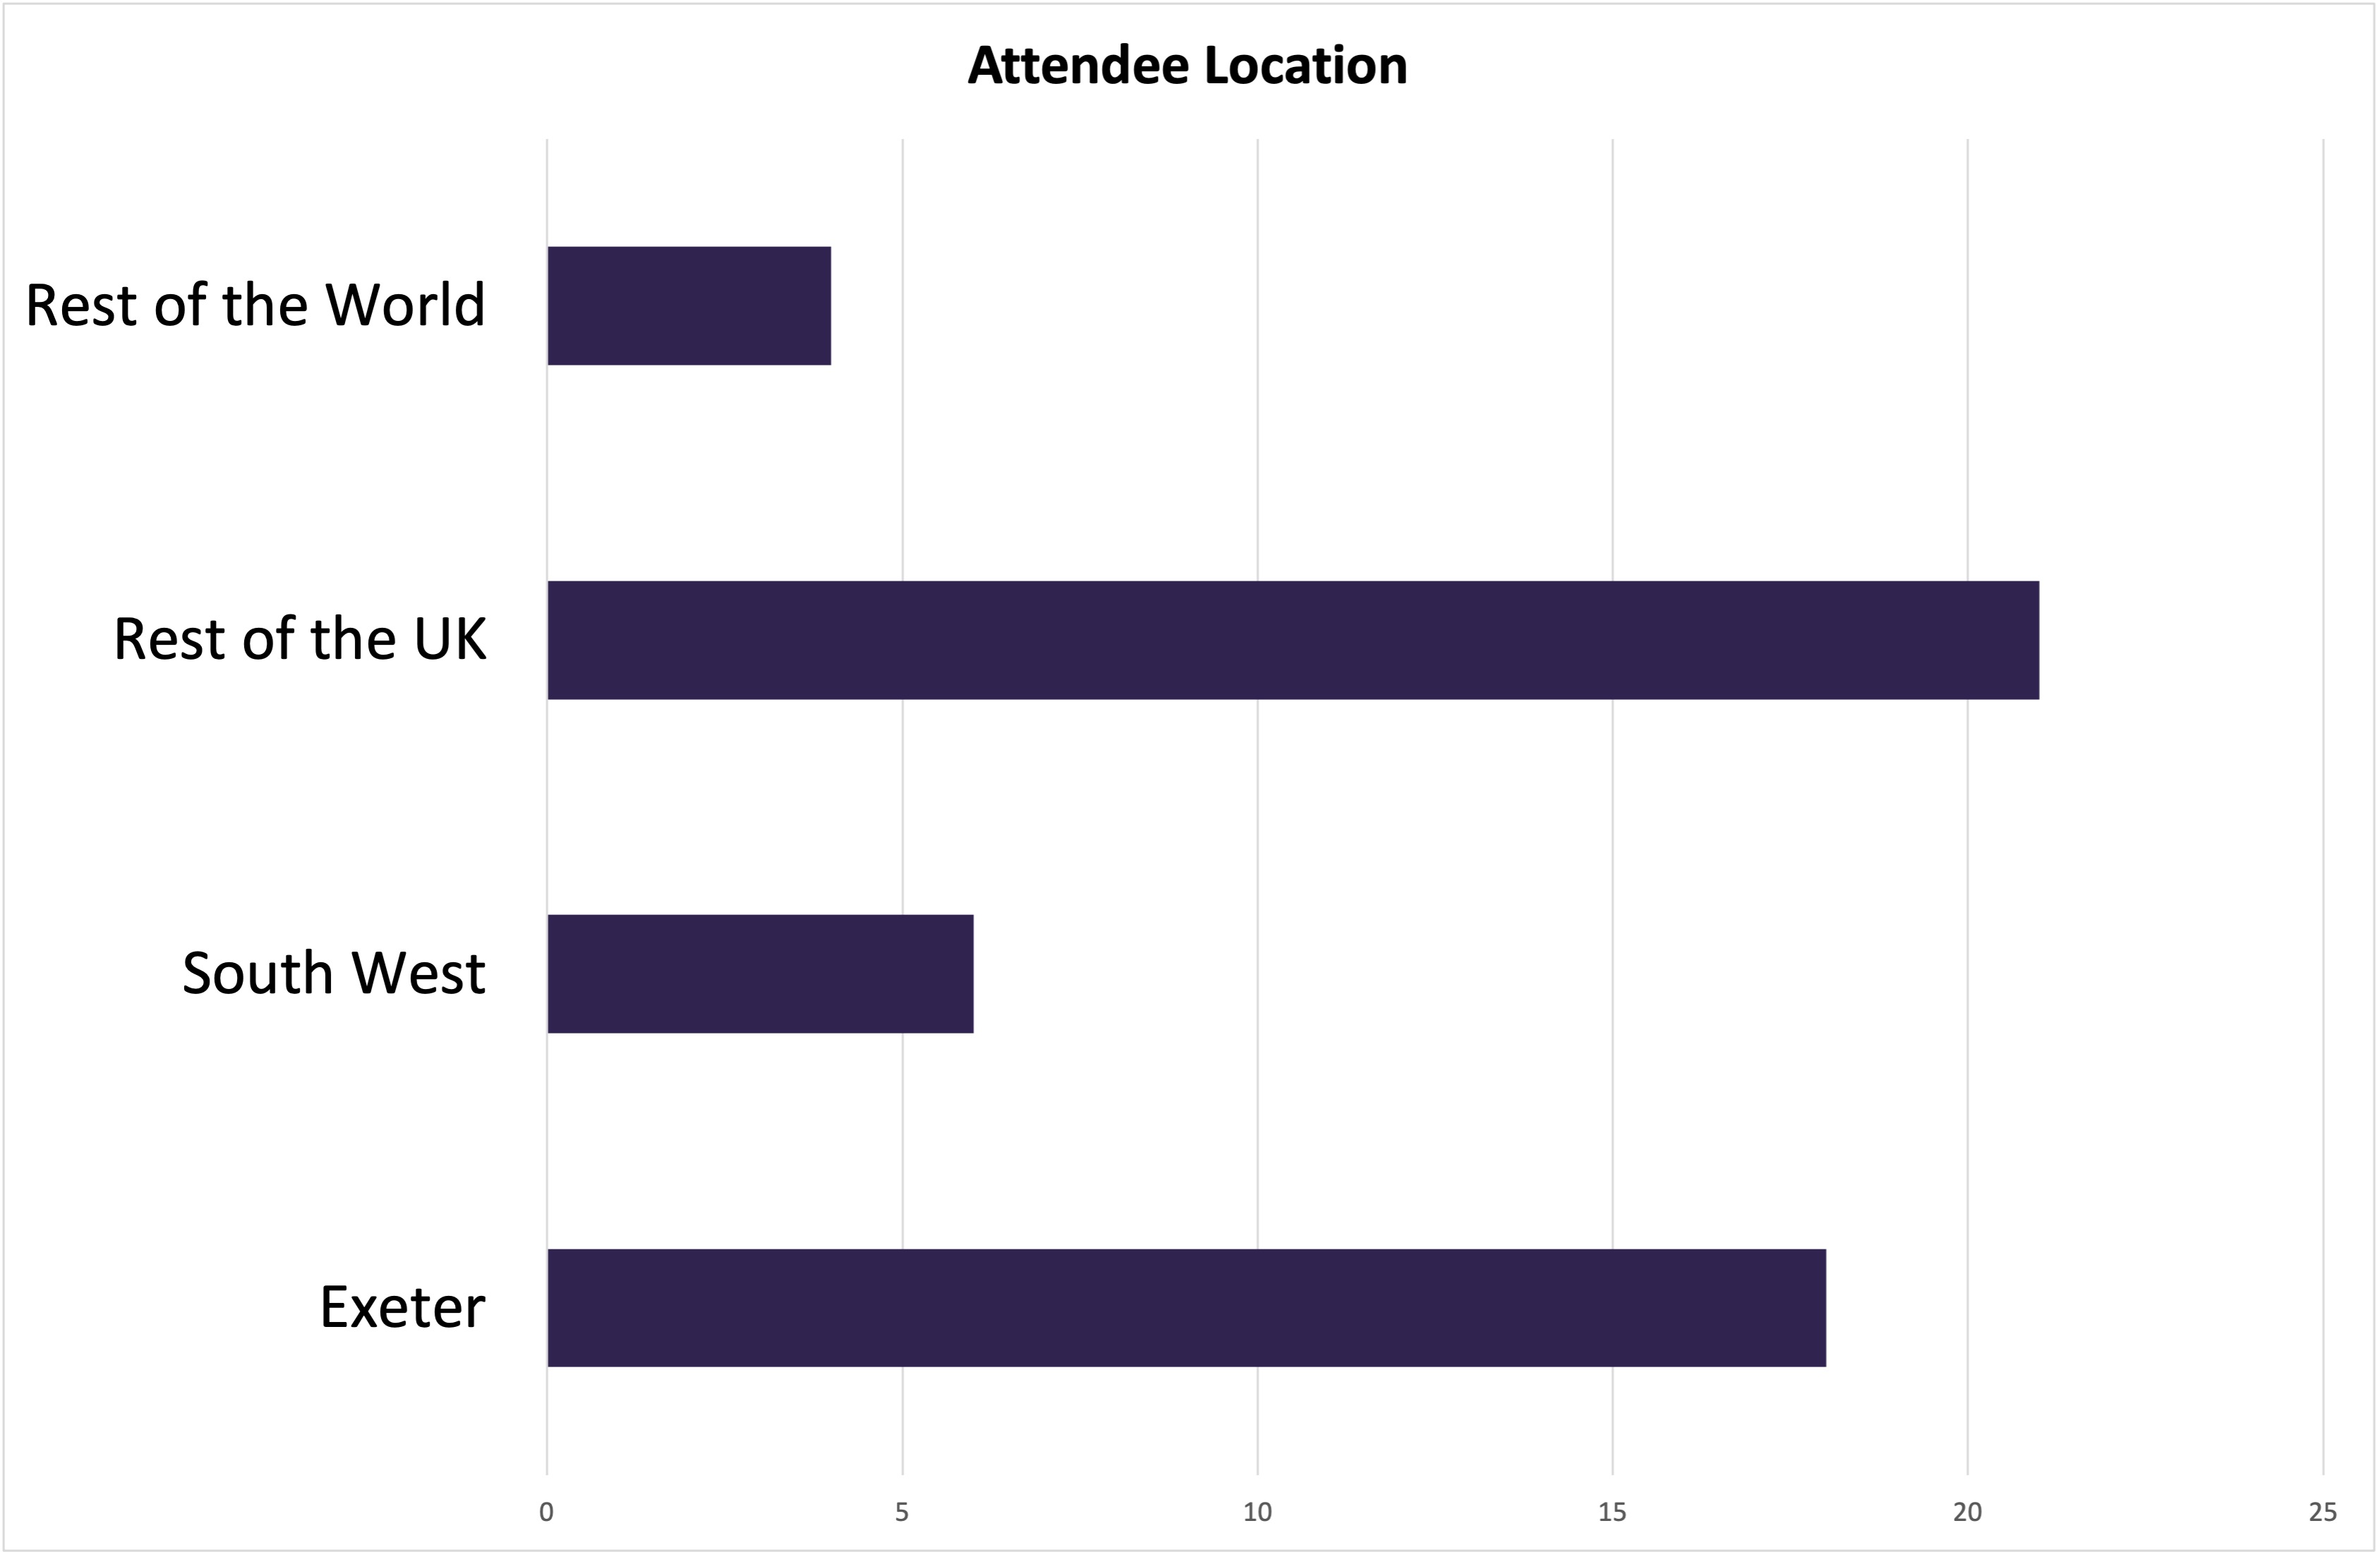 Bar chart of registrants' location data: 18 from Exeter, 6 from the South West, 21 from the rest of the UK and 4 from the Rest of the World.